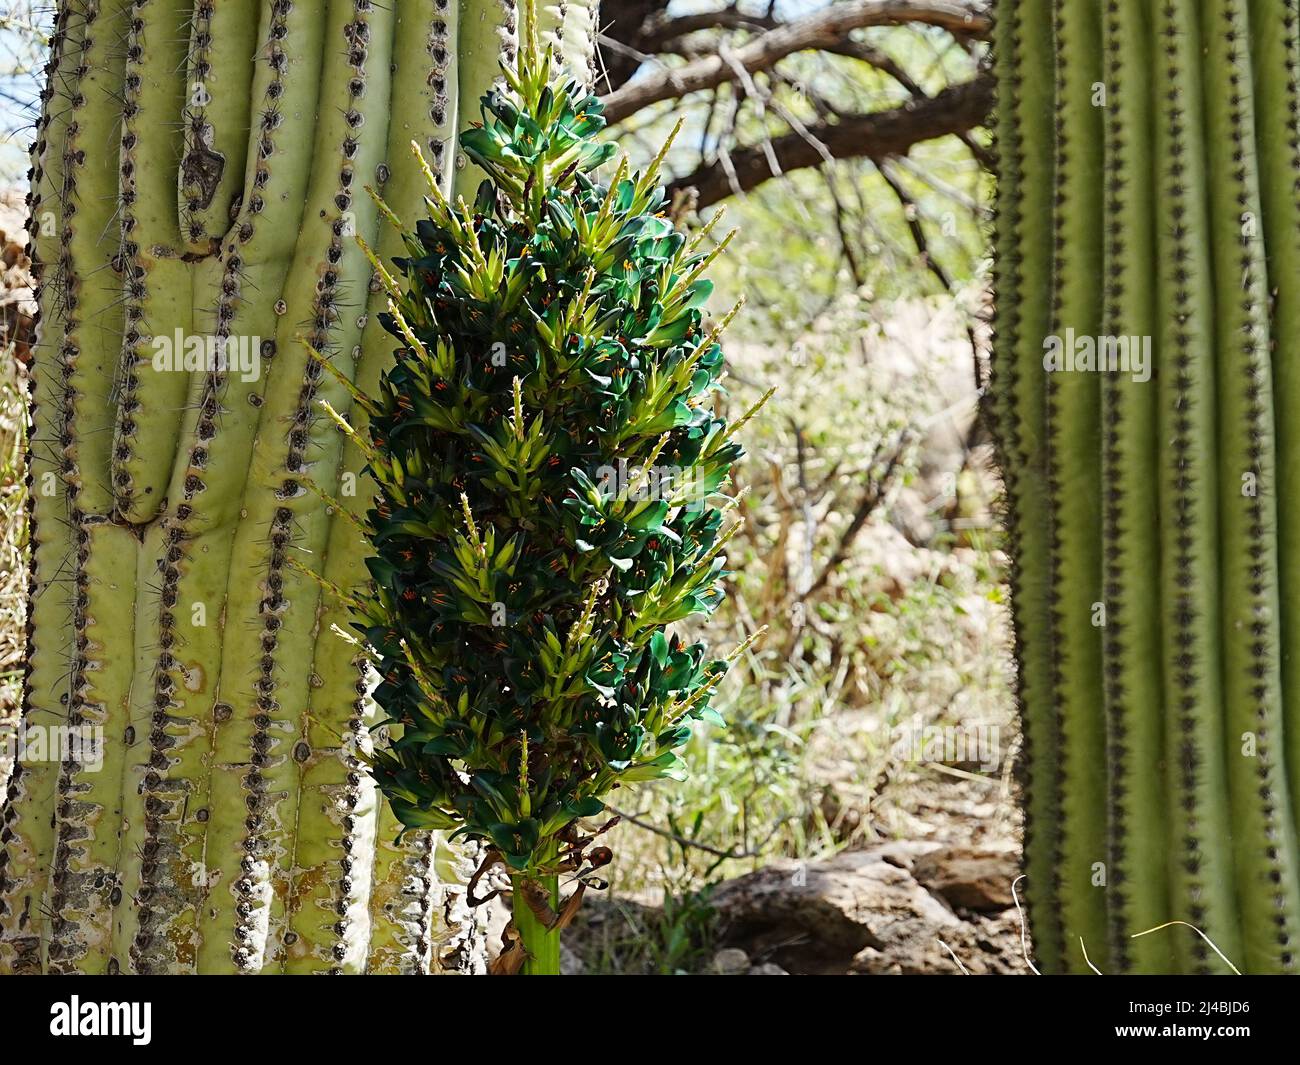 Puya berteroniana is a bromeliad that blooms every 6-8 years on average. Stock Photo